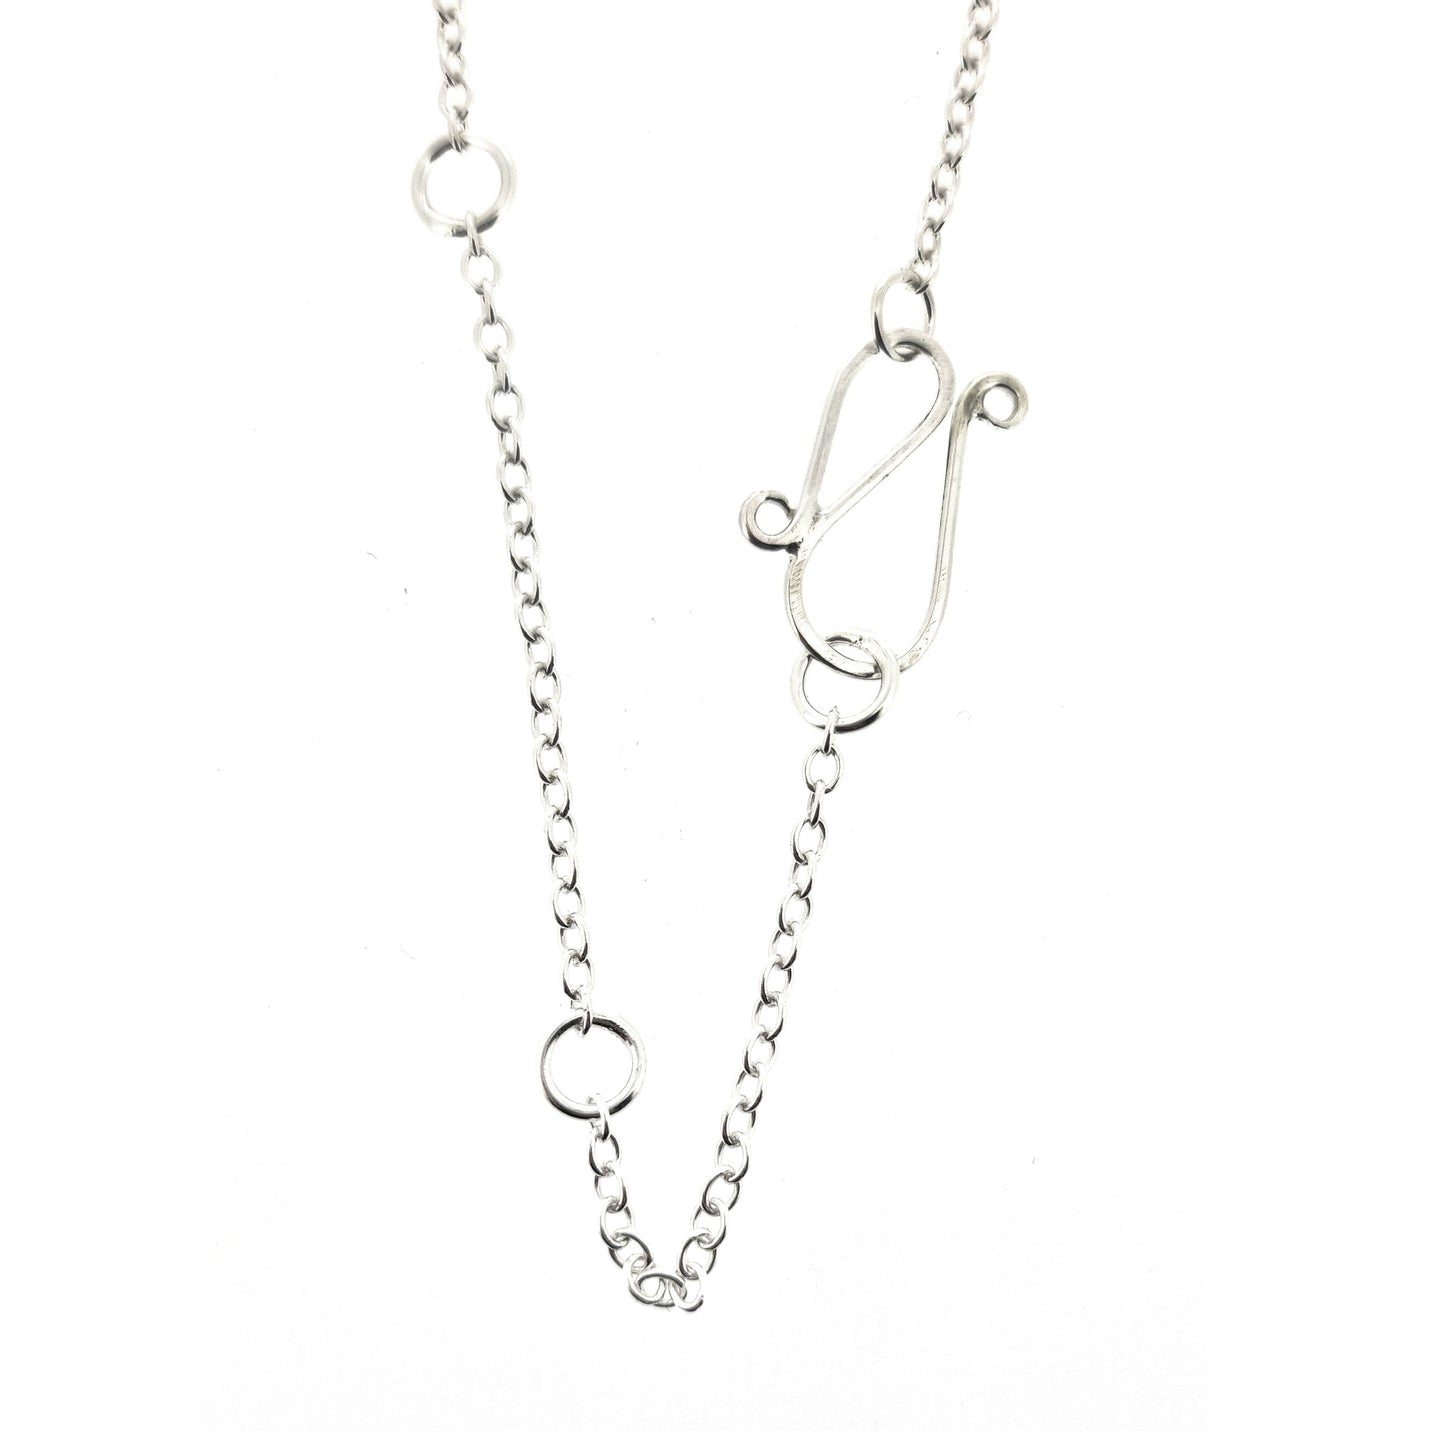 Silver chain with s-clasp and adjustable loops.